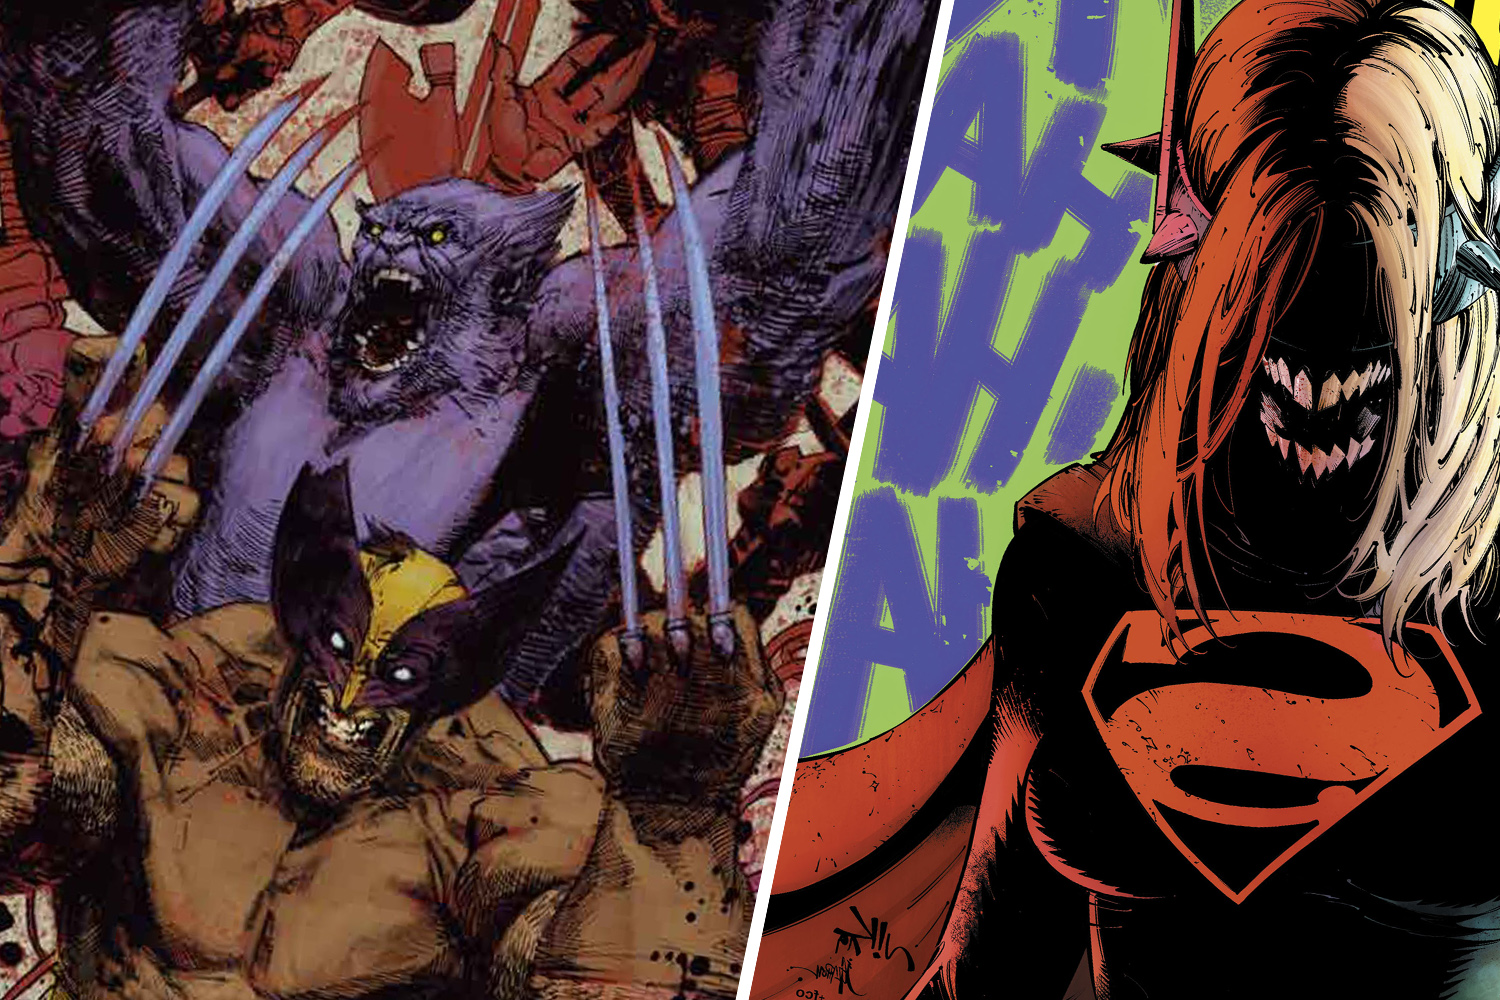 AIPT Comics Podcast Episode 48: Breaking down He-Man with Tim Seeley and Dan Fraga, 2099 flops, and DC reschedules